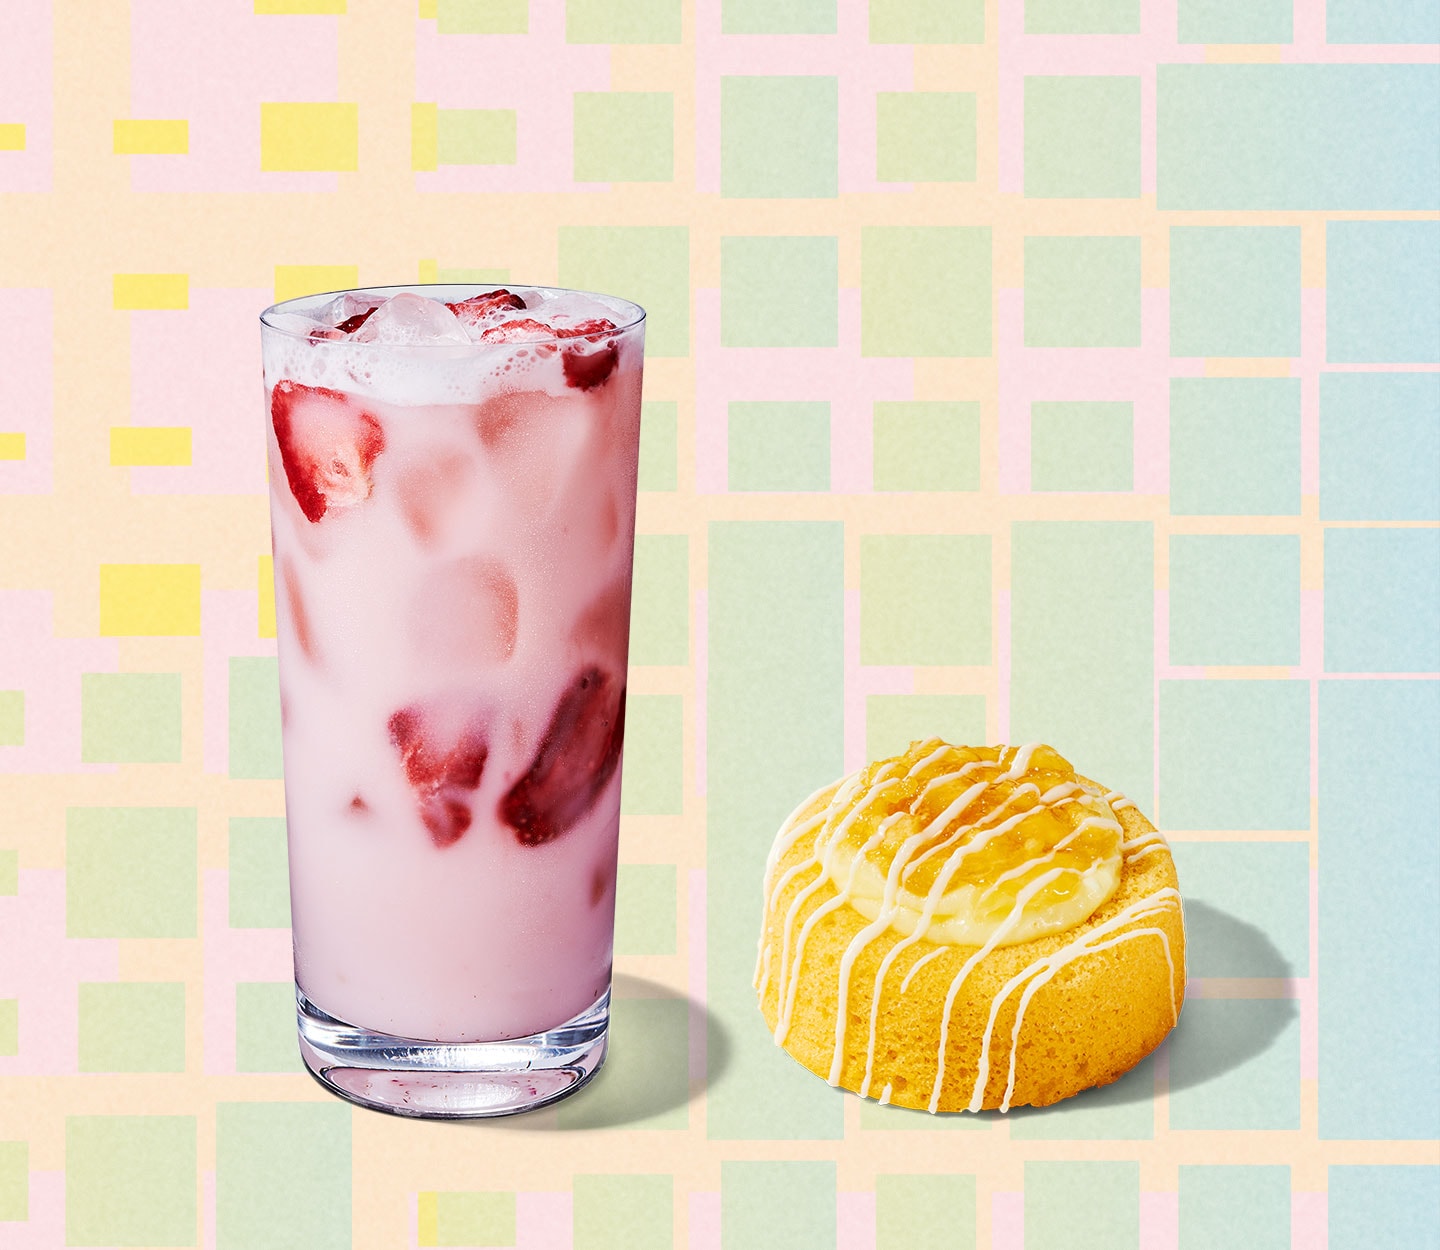 A pink drink in a tall glass with strawberry inclusions next to a pineapple bakery item with a rounded top.